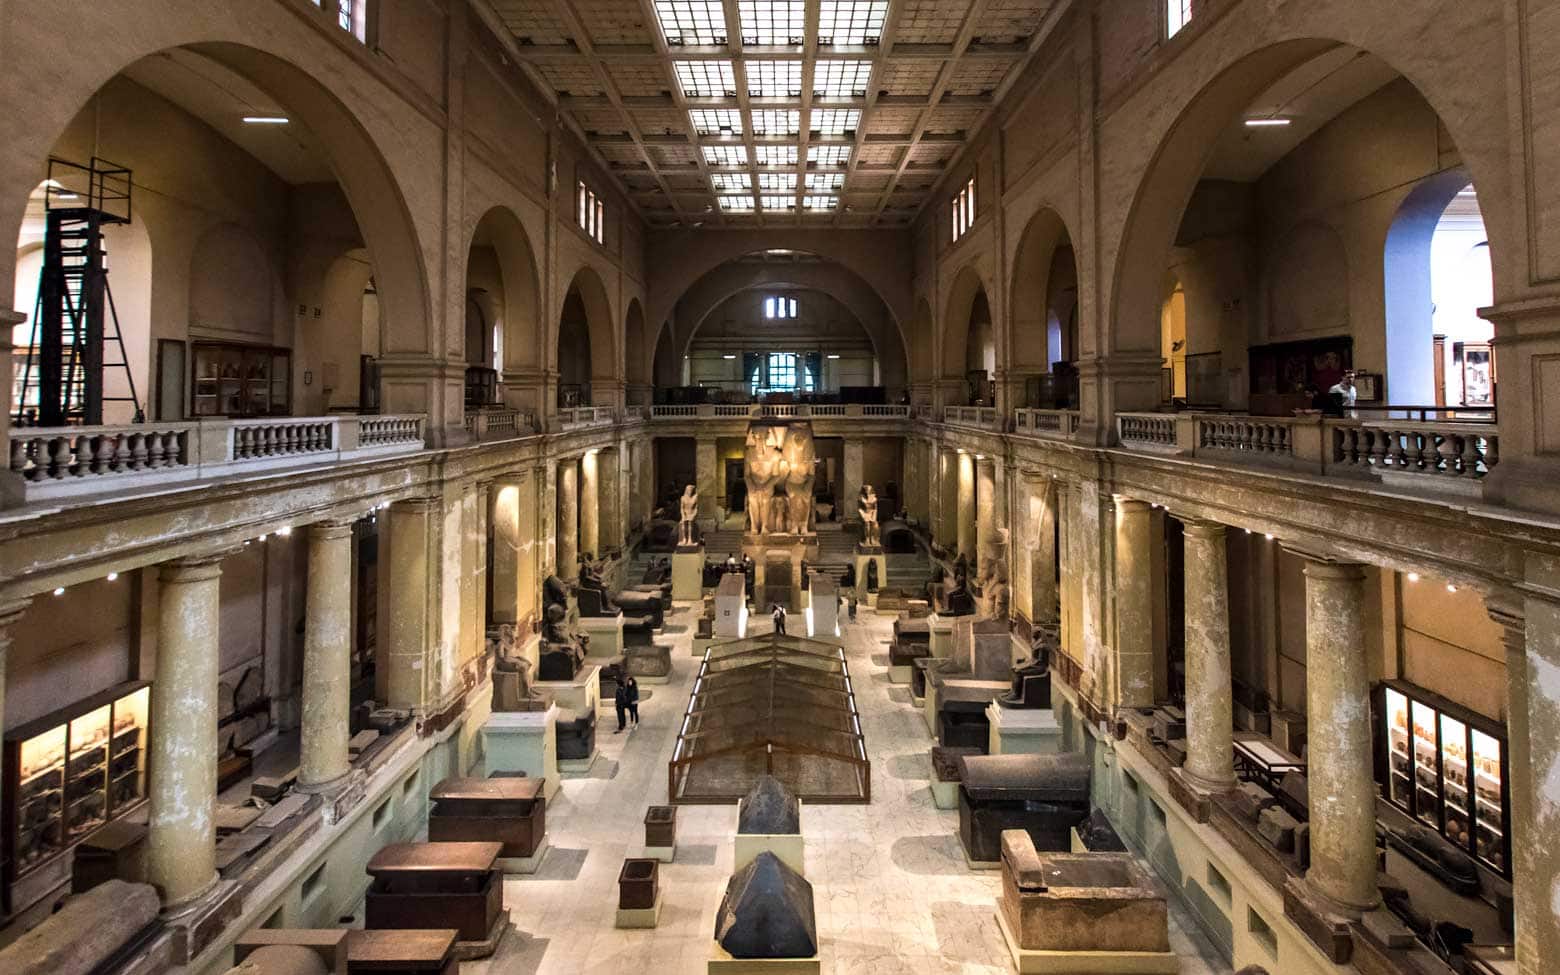 What to see in Cairo - the Egyptian Museum - panorama pic from second floor